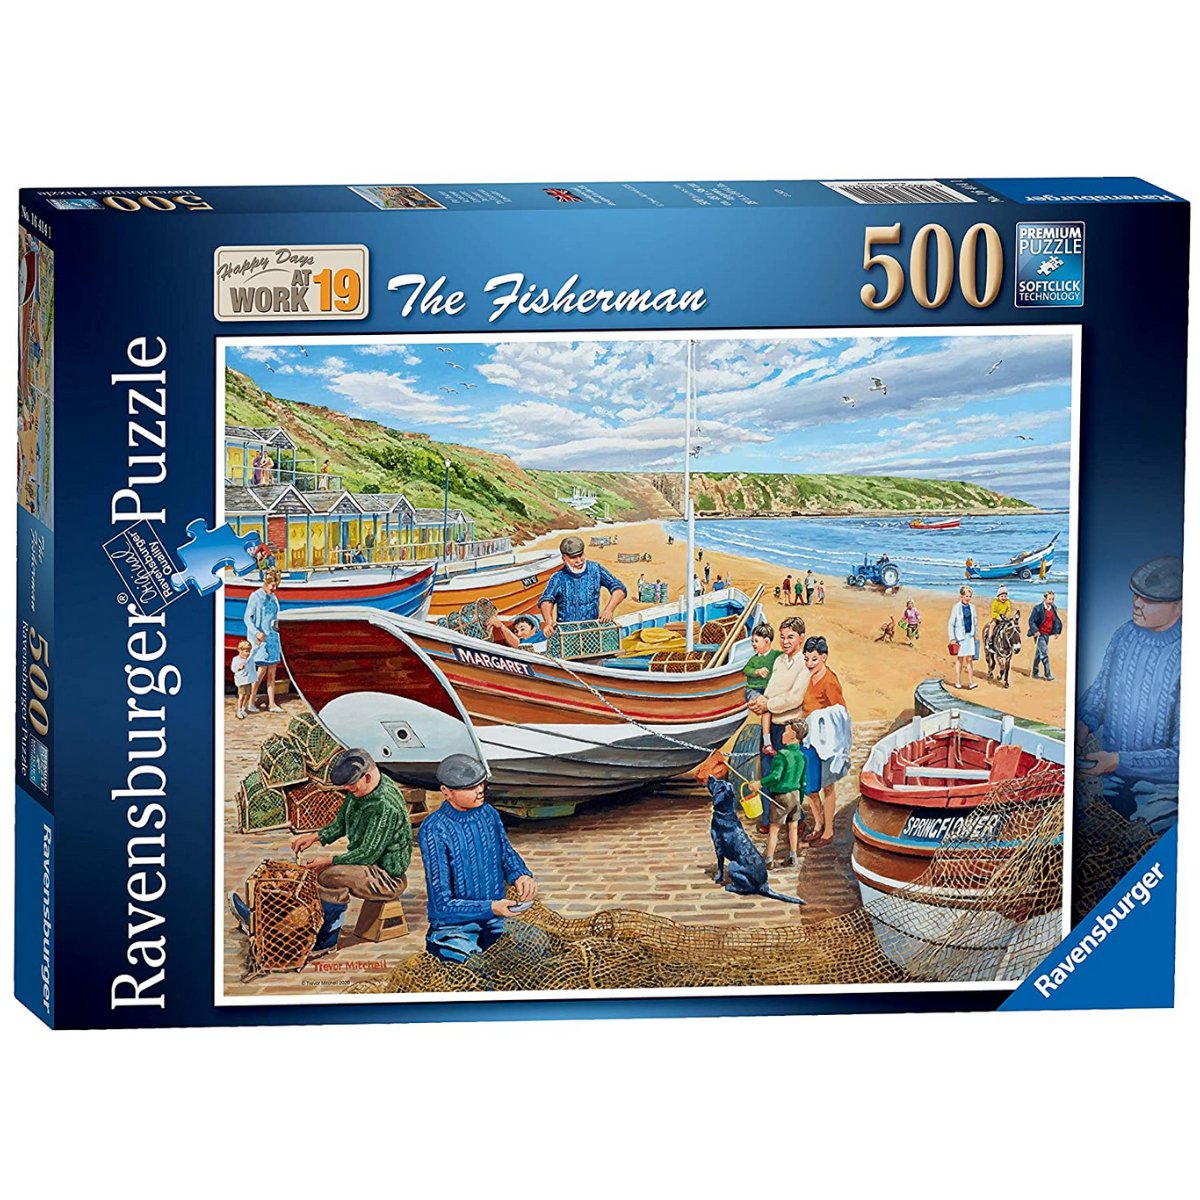 Ravensburger Happy Days at Work, The Fisherman 500 Piece Jigsaw Puzzle - Phillips Hobbies